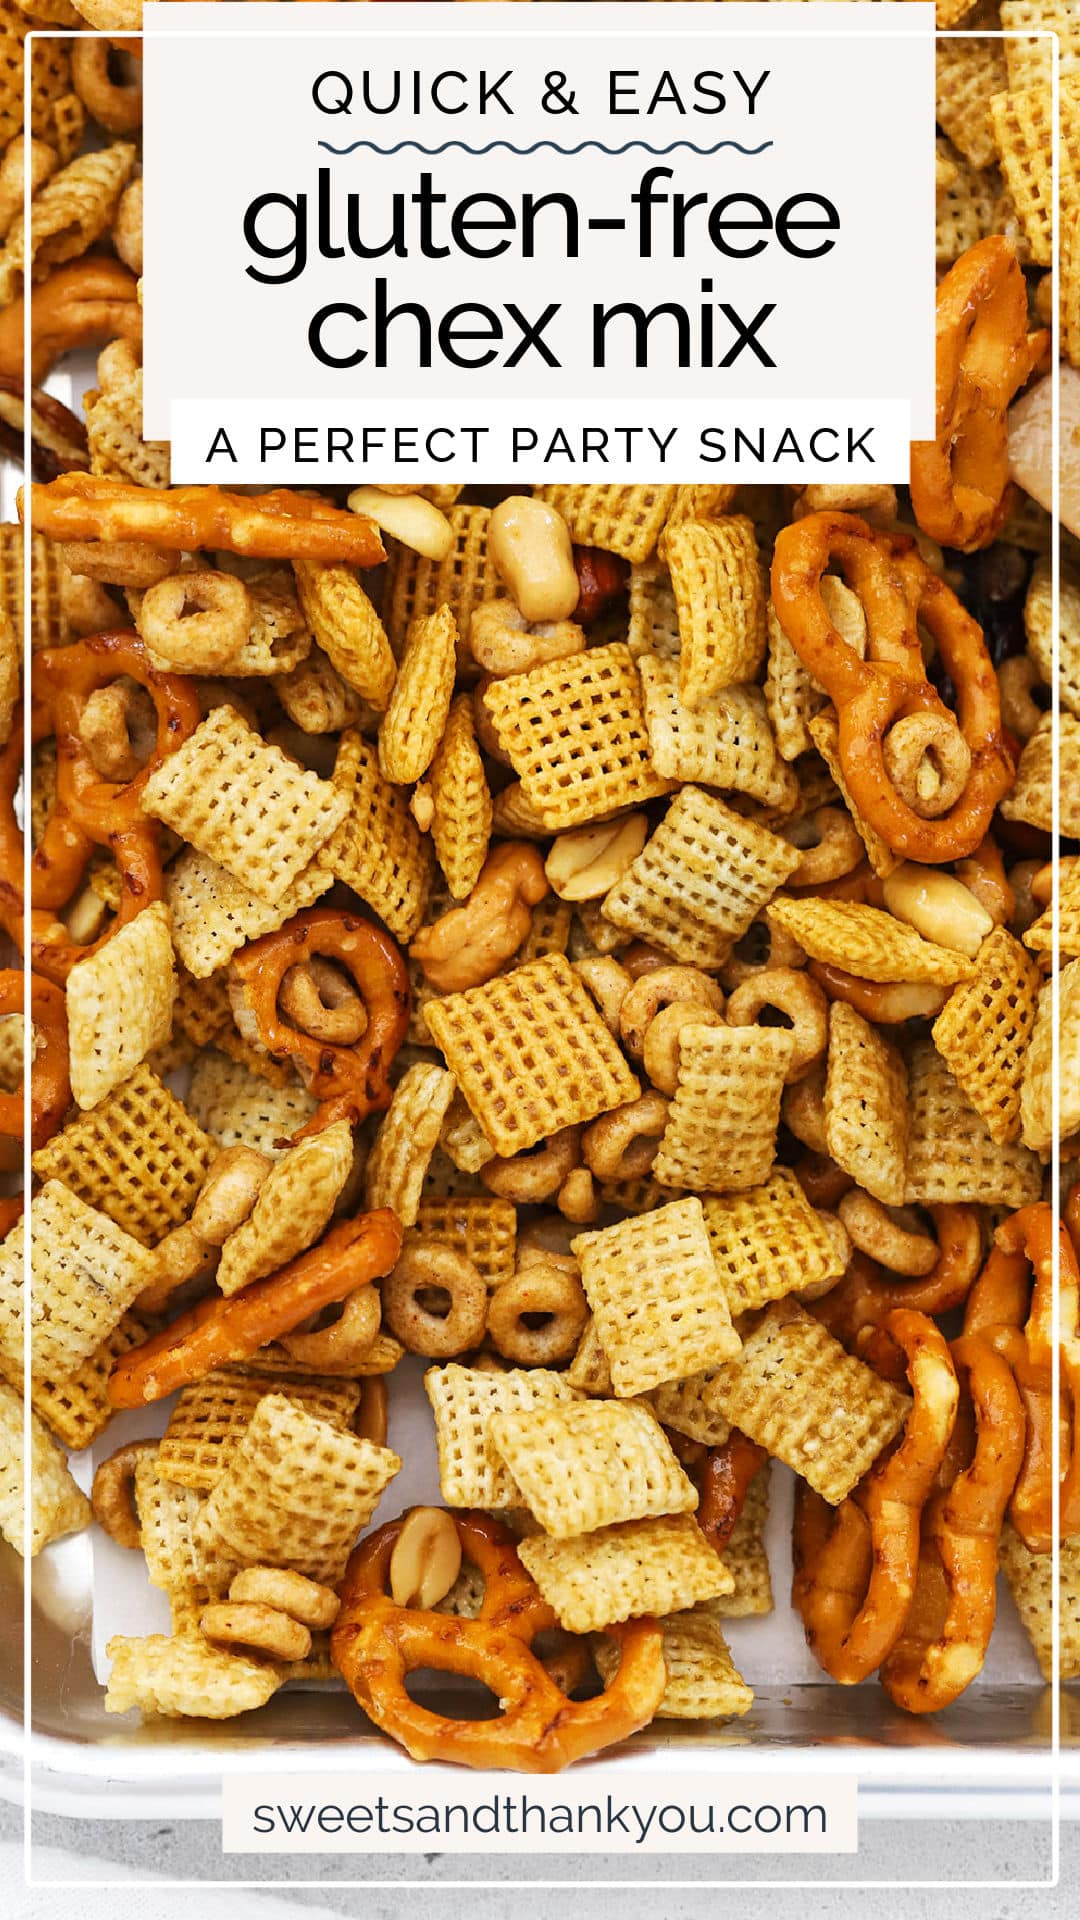 How To Make Gluten-Free Chex Mix - Our savory gluten-free Chex mix recipe is the perfect party snack! You'll love the crunch & flavor! // gluten-free chex party mix // gluten-free savory chex mix // gluten-free party mix // gluten-free Chex Mix for a party / gluten-free party snacks // gluten-free snack recipe